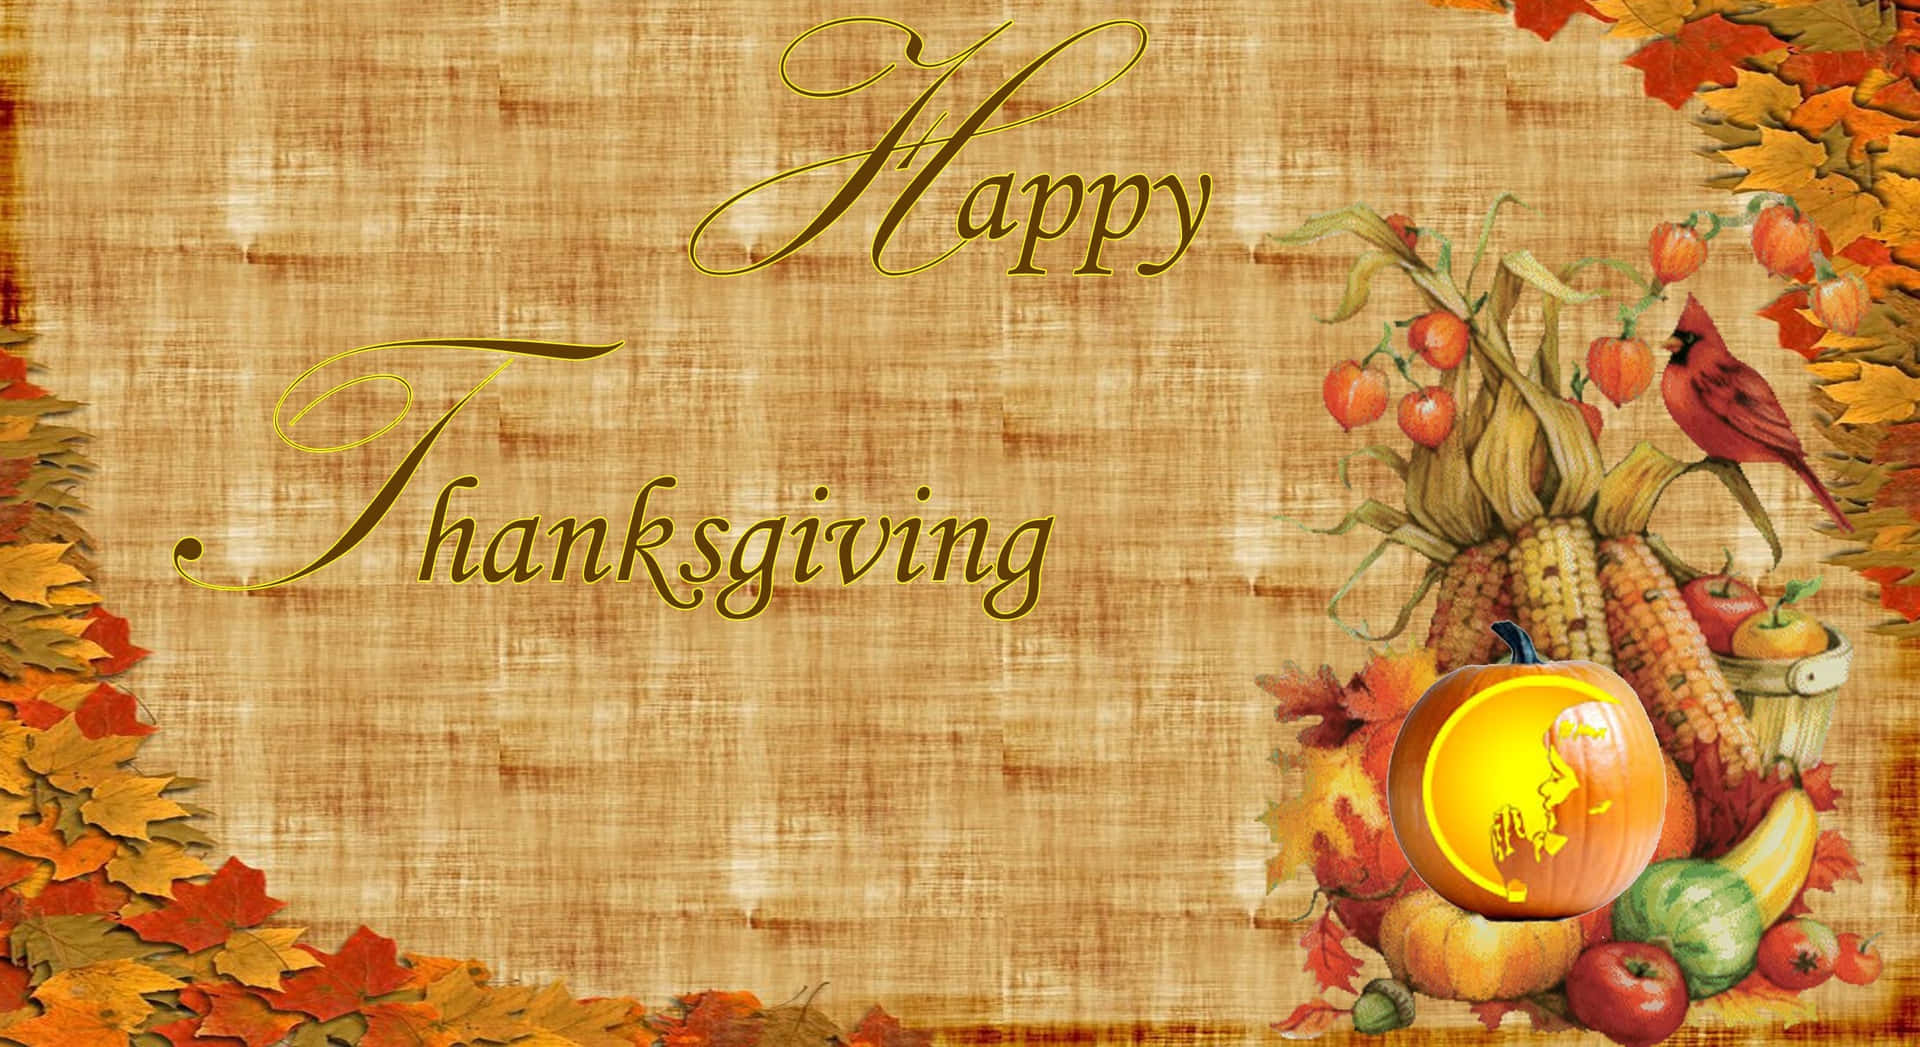 Happy Thanksgiving Greeting On Brown Parchment Wallpaper